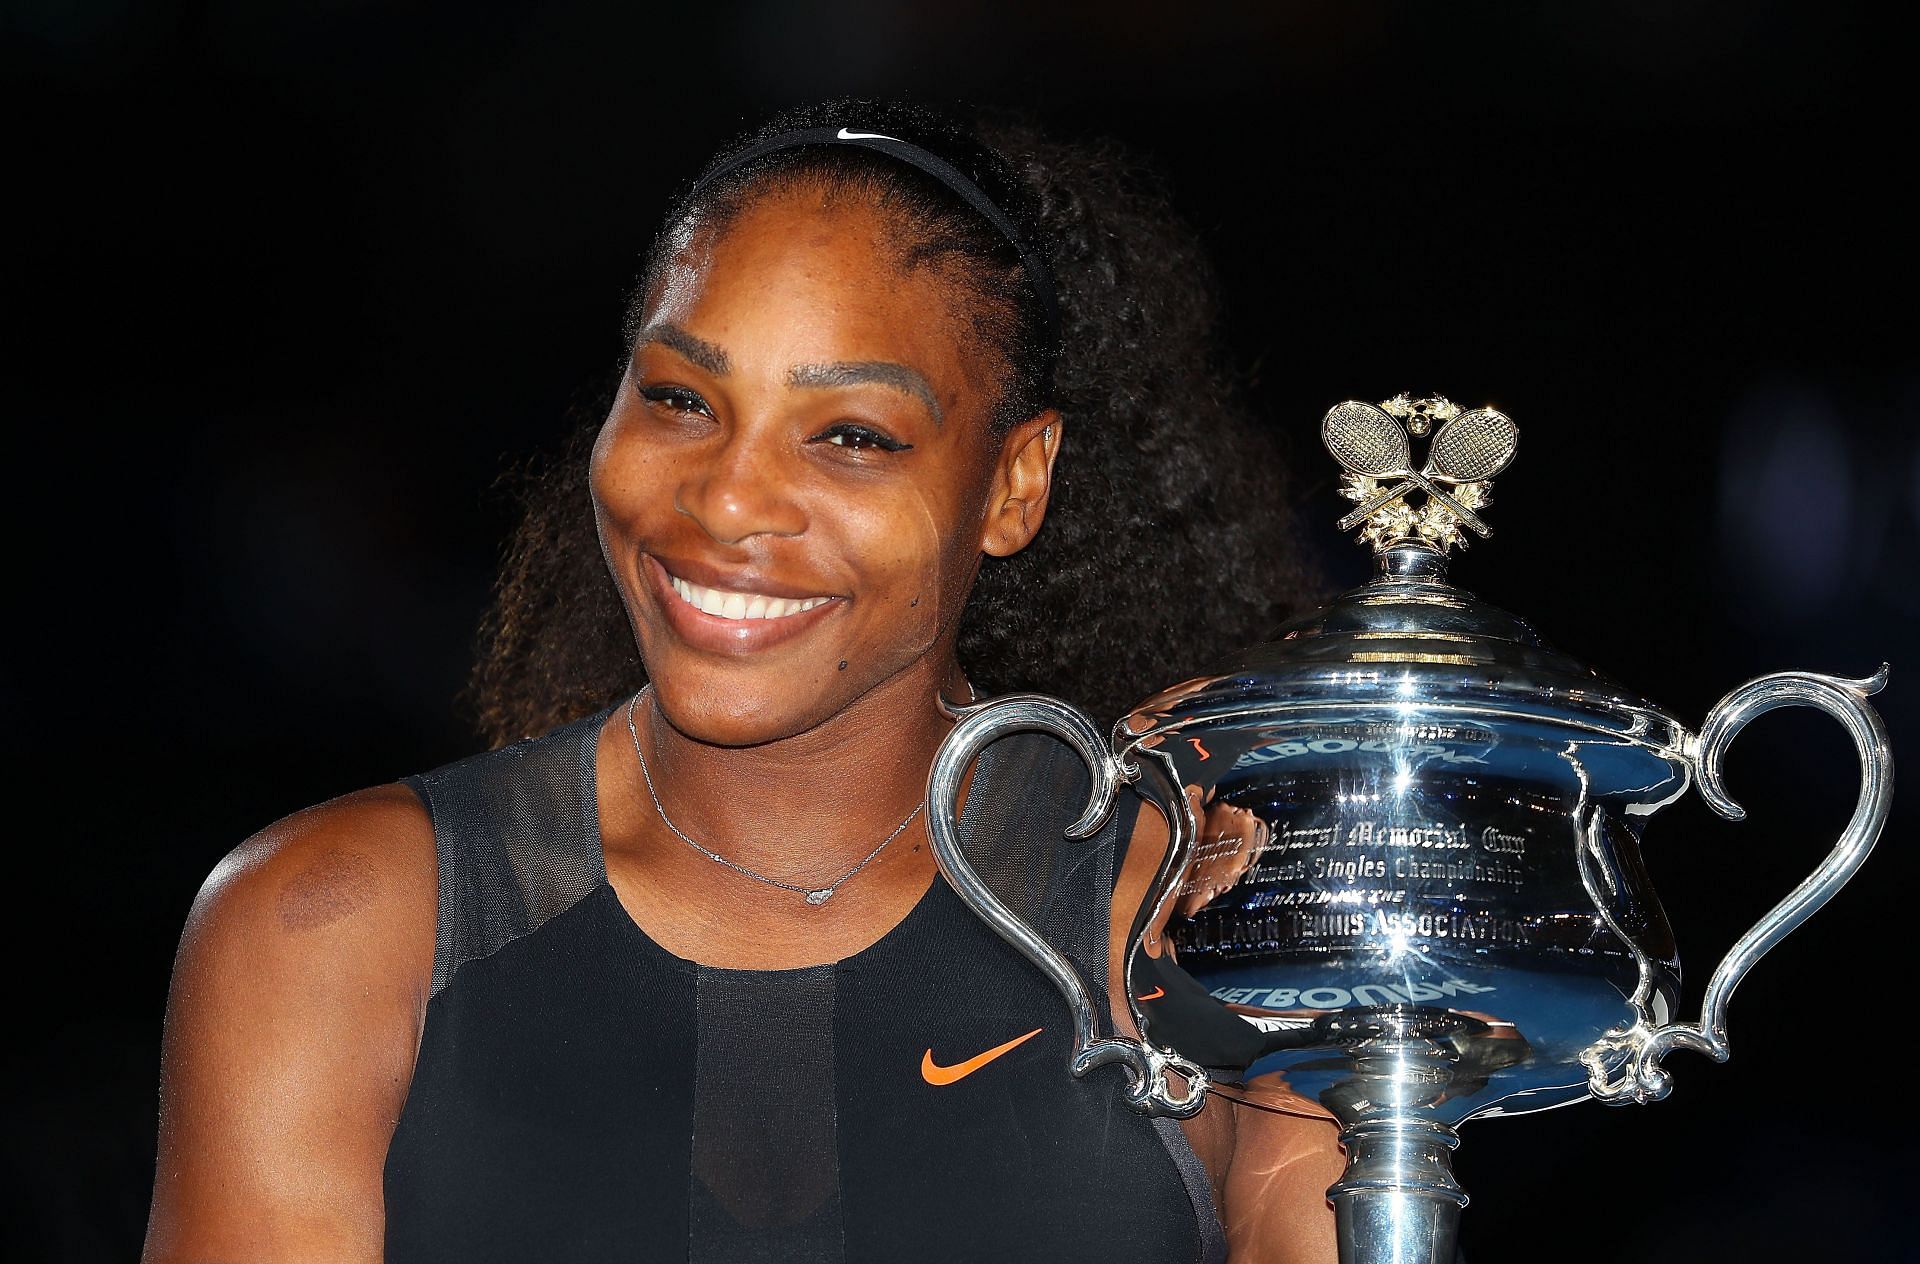 Serena Williams has said that she is not giving up on winning a 24th Grand Slam title